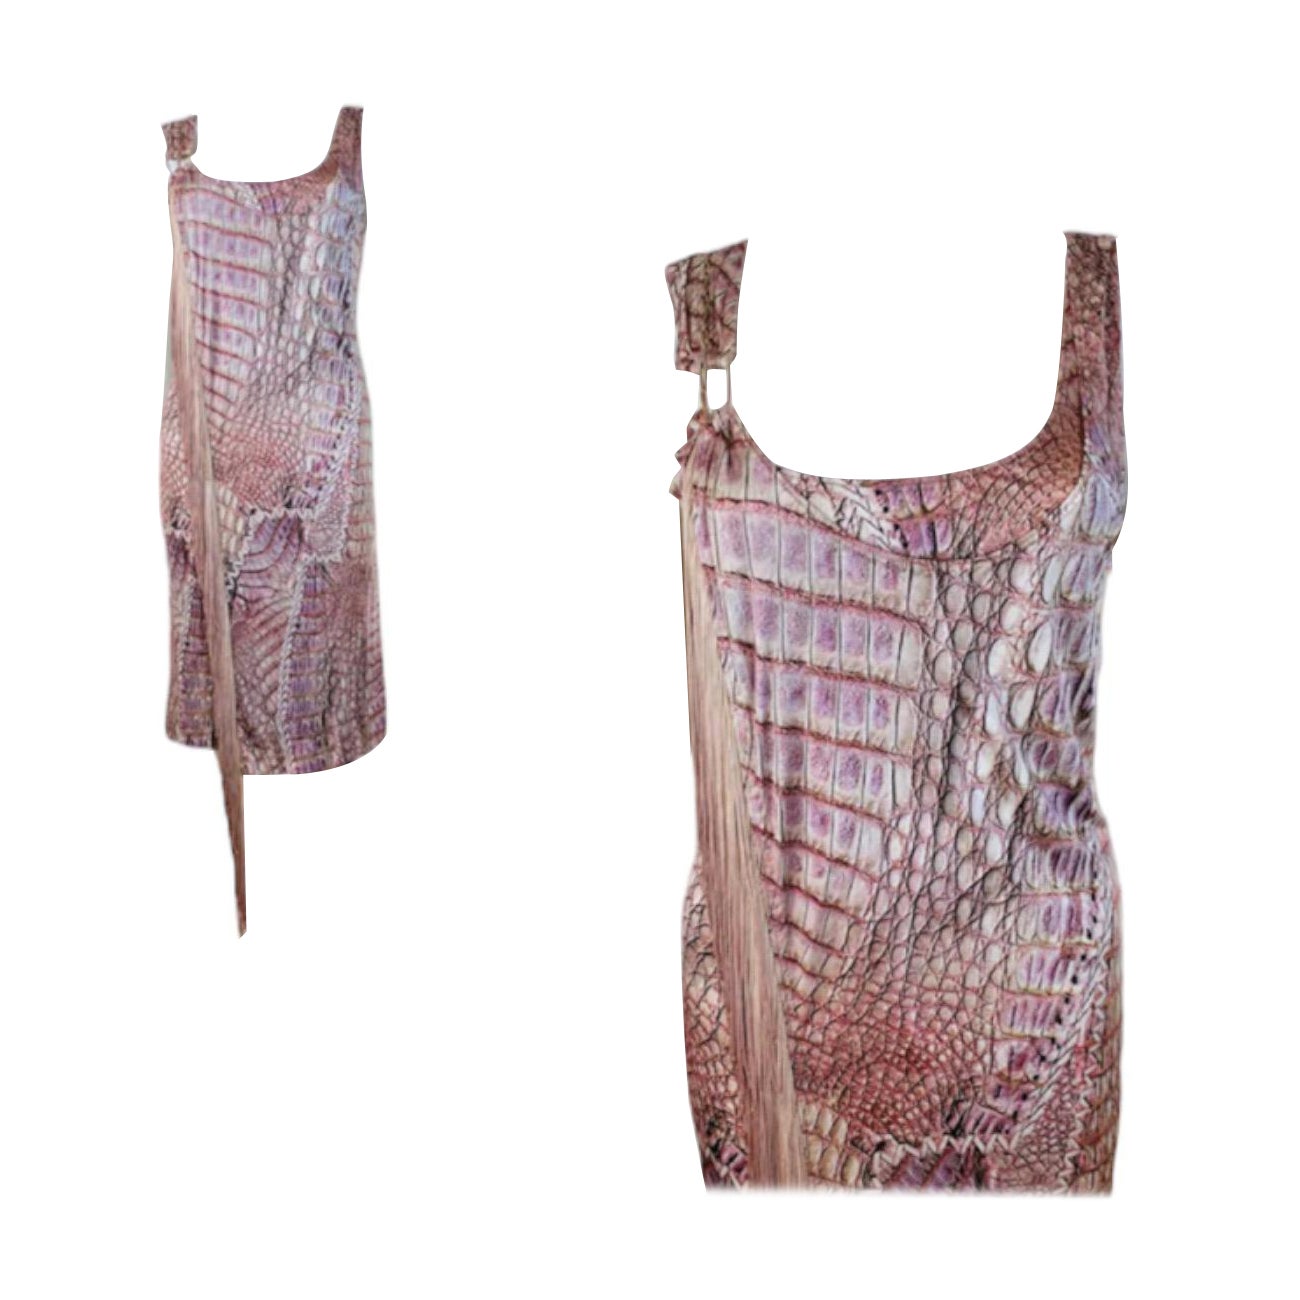 Vintage 2000s Y2K Roberto Cavalli Dress (pinned to mannequin)
Snake reptile print viscose fabric
Rounded neckline
Shift style dress with ombre dyed fringe asymmetrically down the right side
Sleeveless
Stitch detail on the front + back of the right